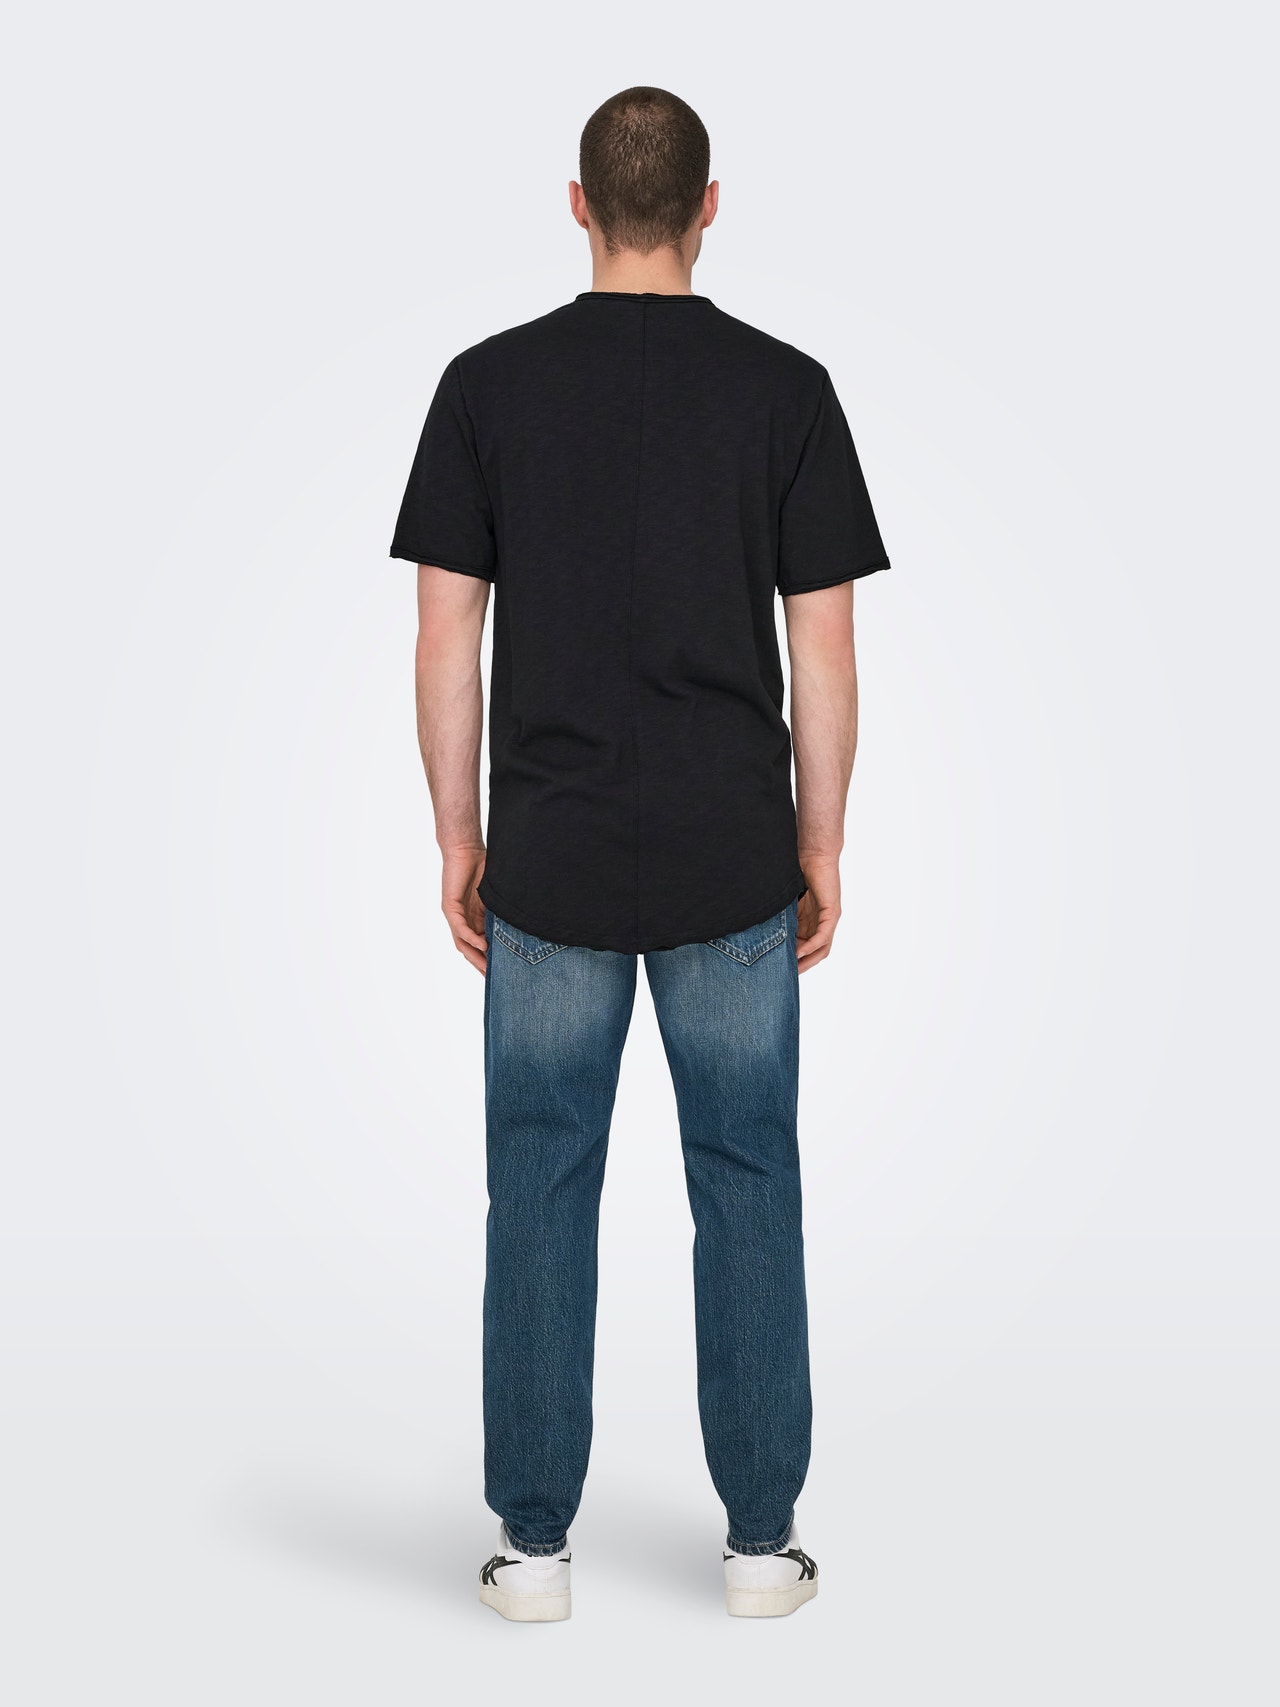 ONLY & SONS Long Line Fit Round Neck T-Shirt -Black - 22017822